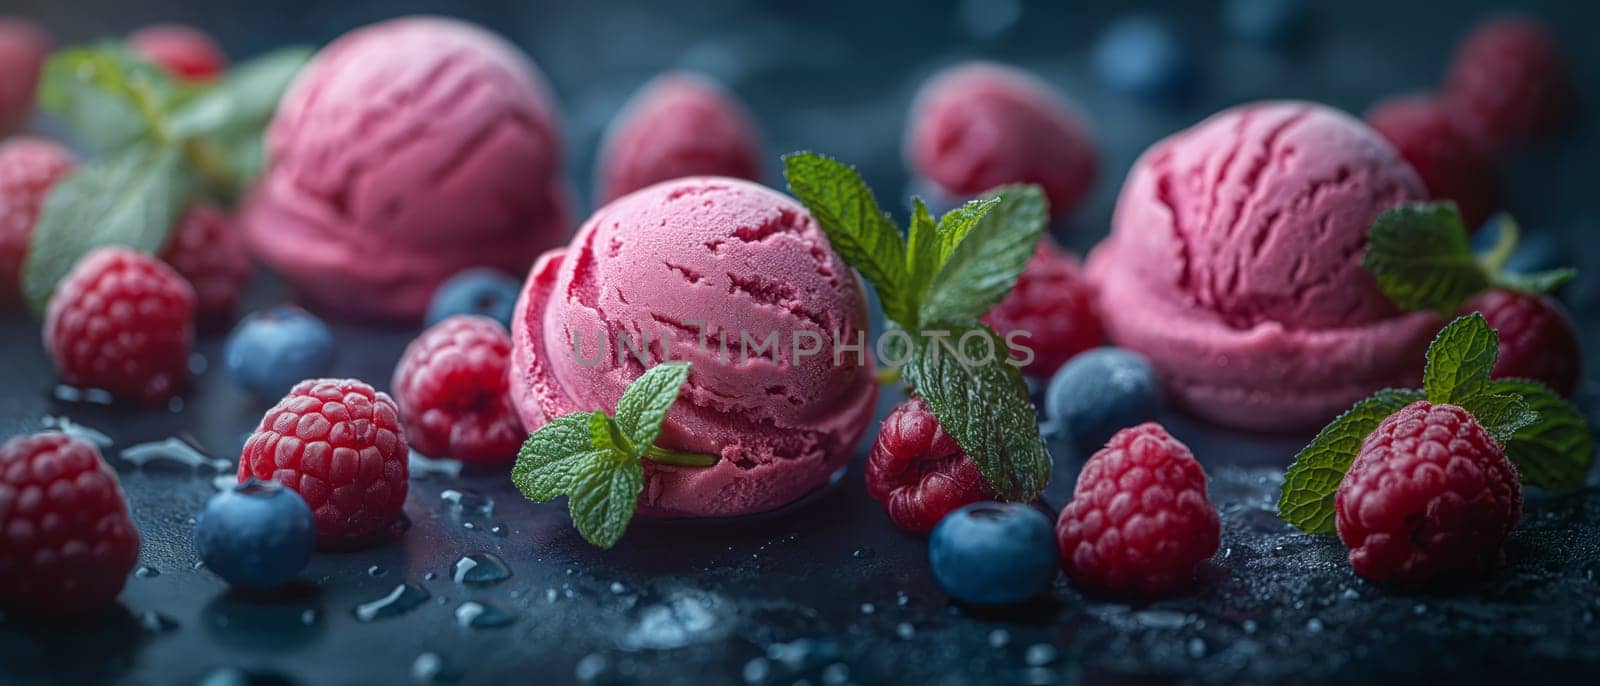 Ice cream with raspberries and blueberries. Selective focus.